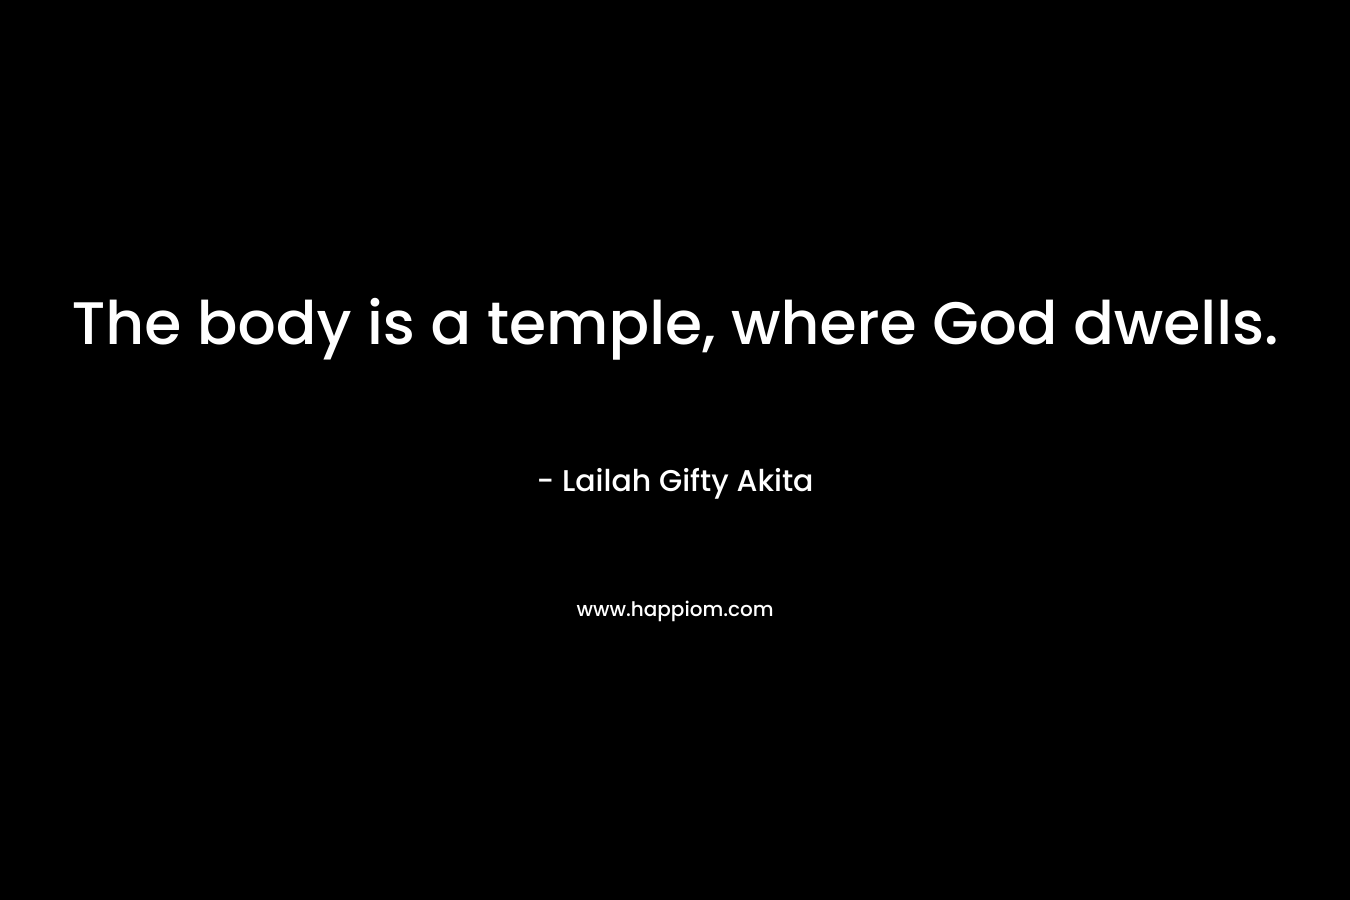 The body is a temple, where God dwells.